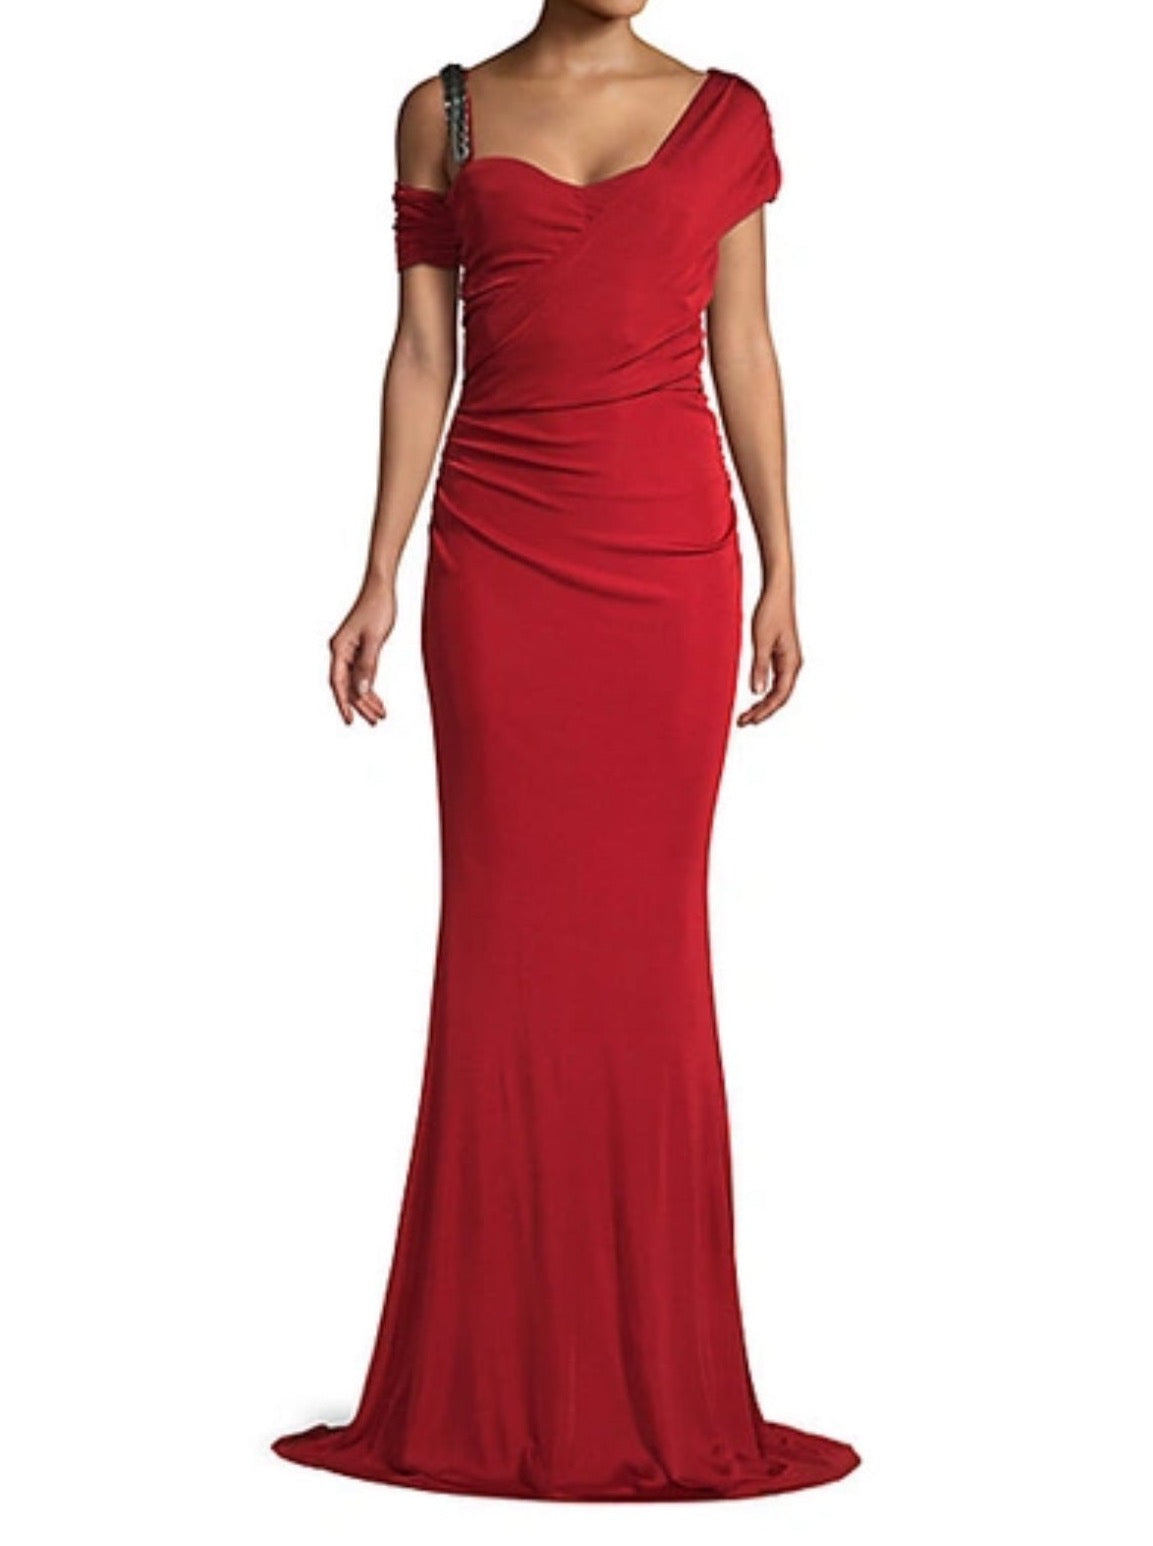 Roberto Cavalli Deep Red Gown with Silver Strap Detail